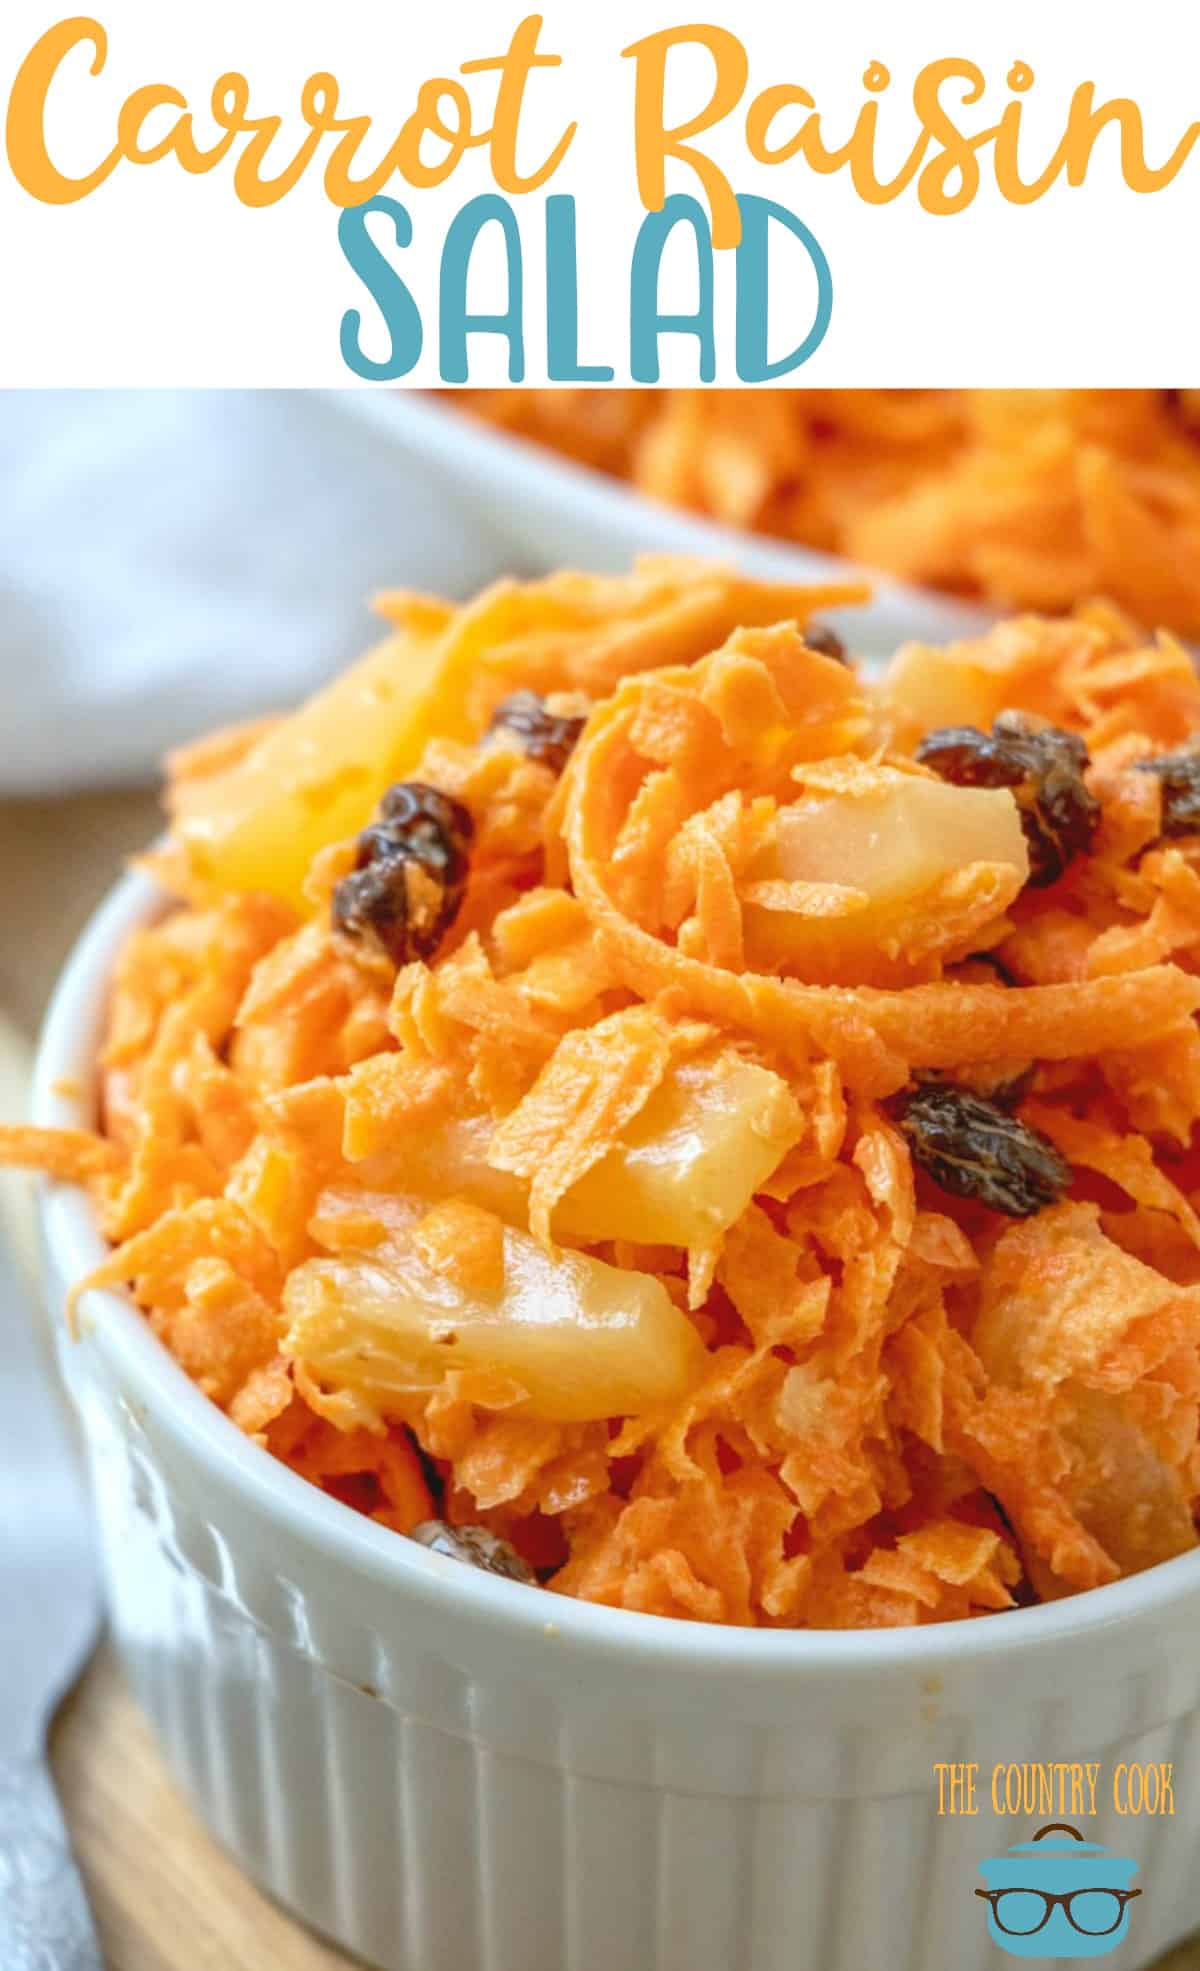 Homemade Carrot Raisin Salad recipe from The Country Cook #sidedish #picnic